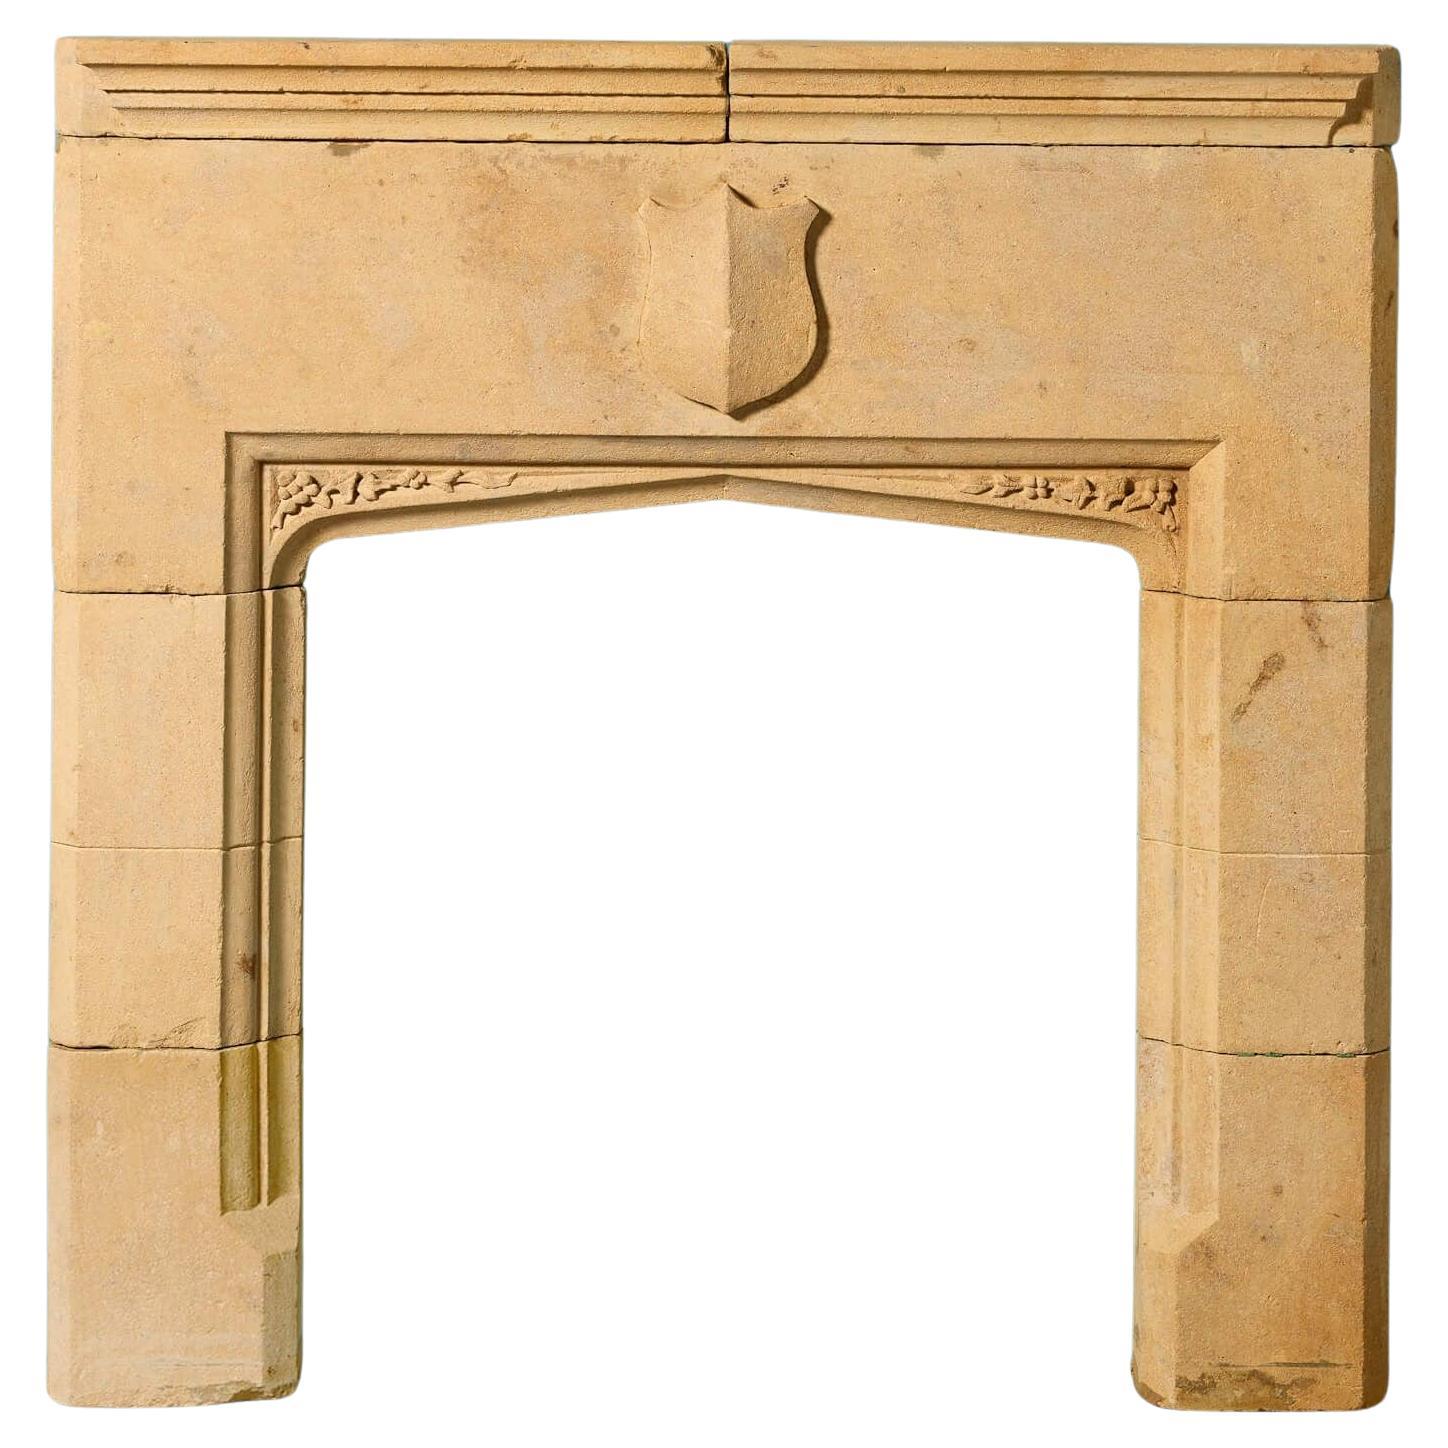 Tudor Fireplaces and Mantels